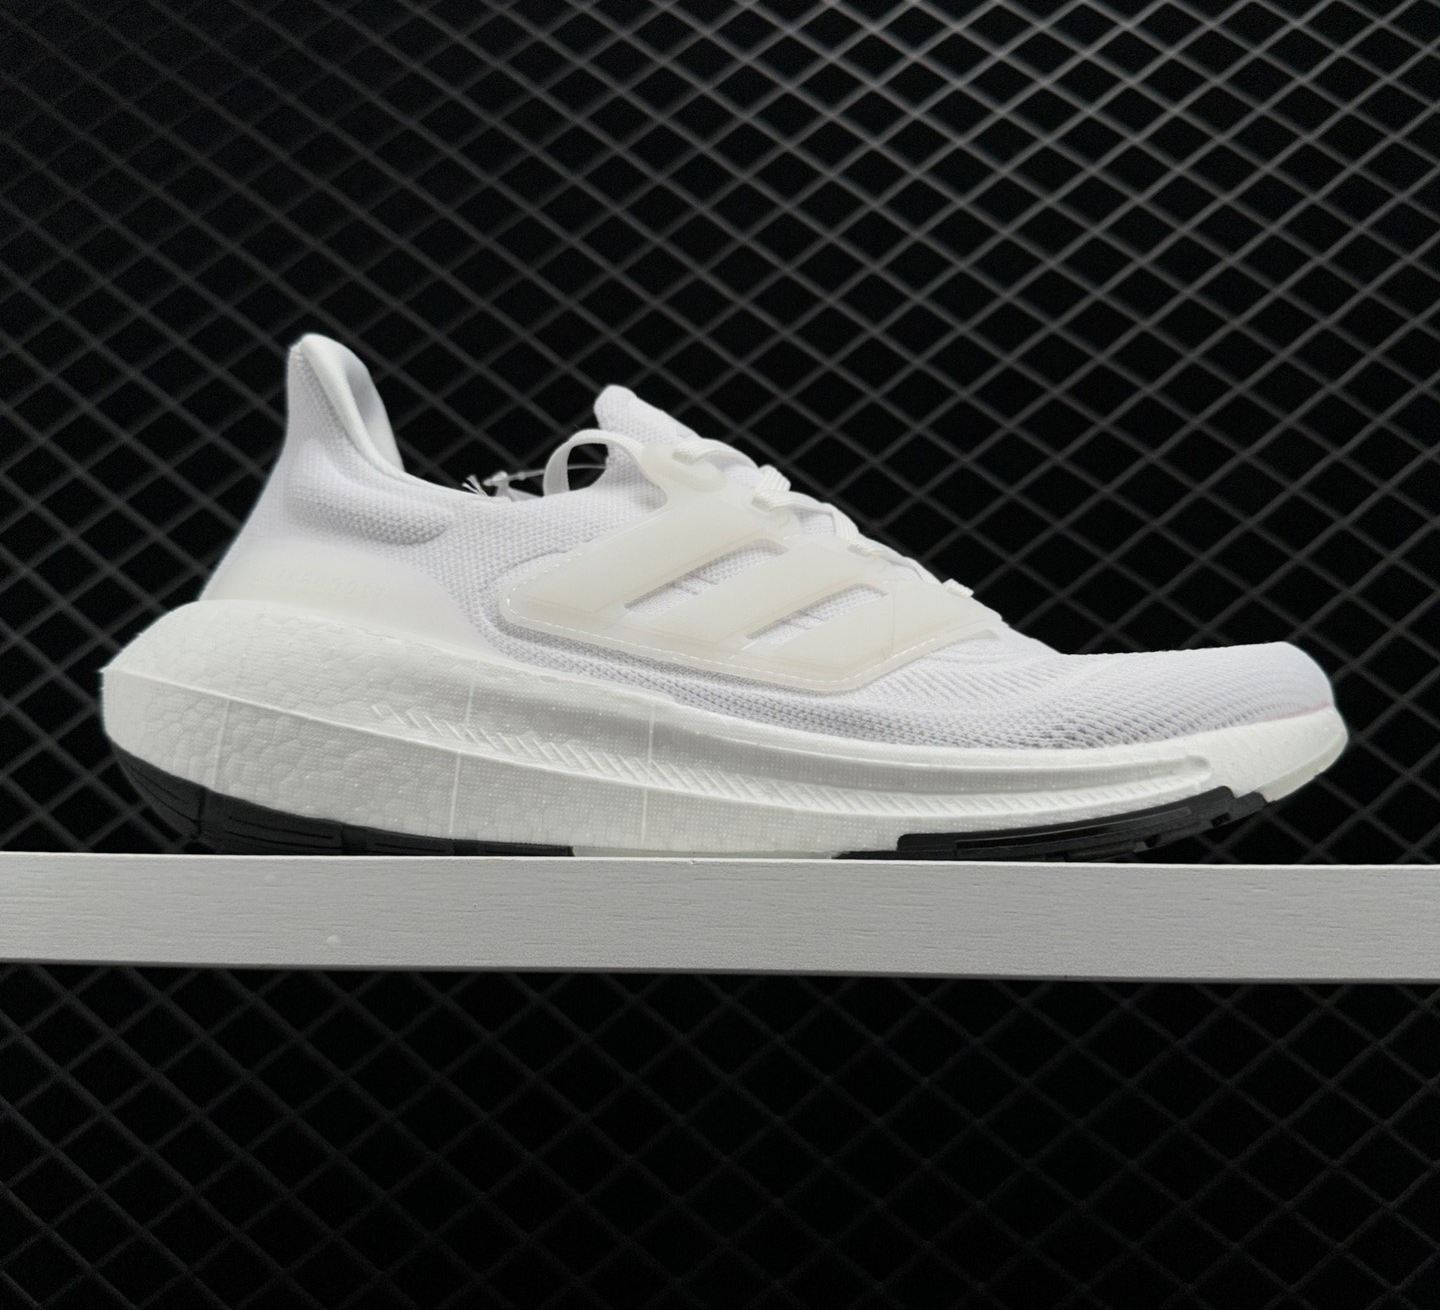 Adidas ULTRABOOST LIGHT White GY9352 | Top Running Shoes 2021